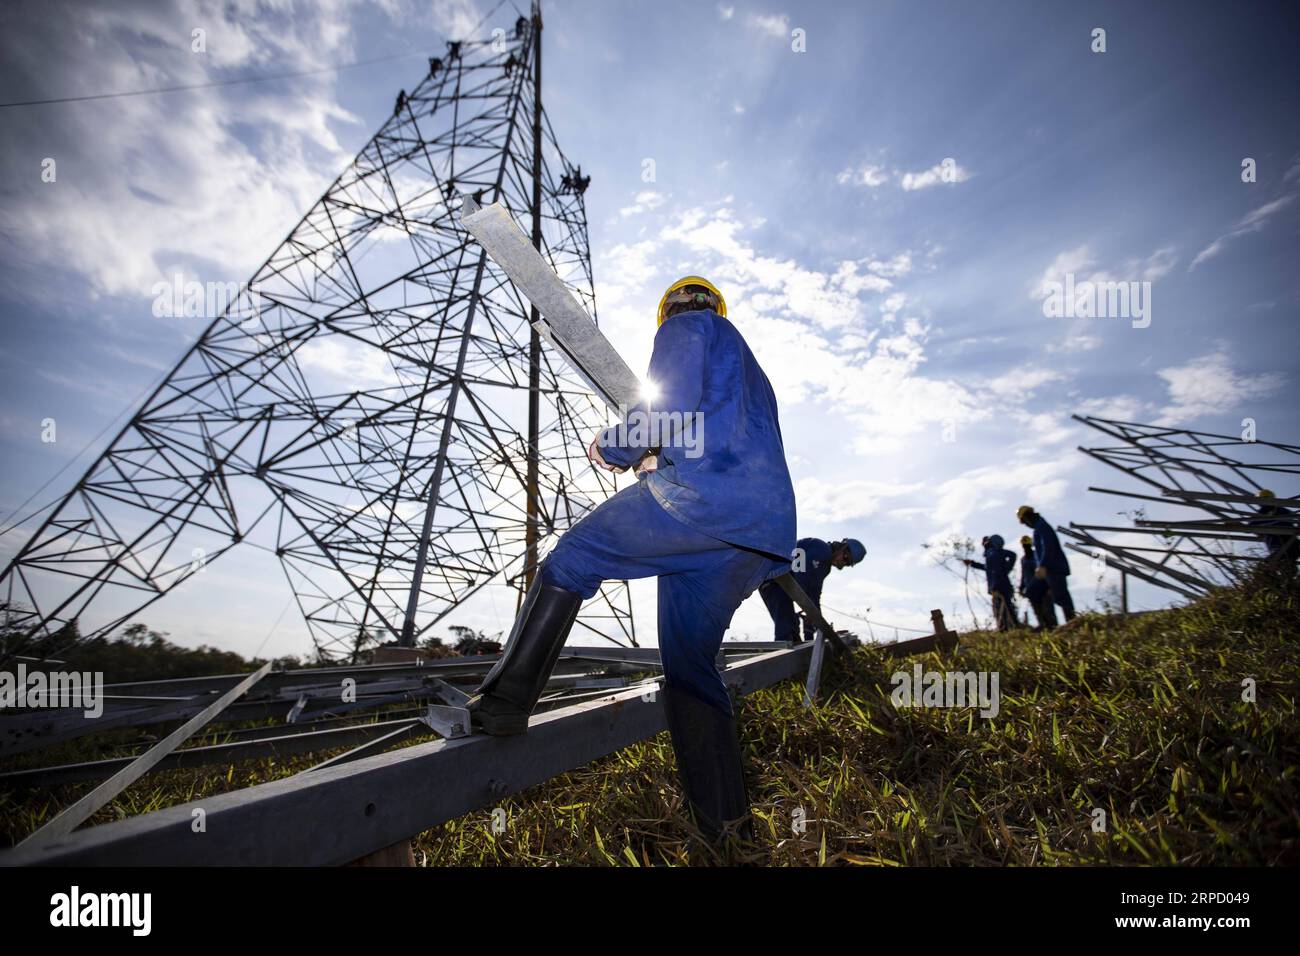 (190717) -- BEIJING, July 17, 2019 -- Workers are seen at a site for the ultra-high-voltage electricity transmission project at the Belo Monte hydroelectric dam in Brazil, Aug. 7, 2018. ) Xinhua headlines: Expanded cooperation brings LatAm, China closer to envisioned community with shared future LixMing PUBLICATIONxNOTxINxCHN Stock Photo